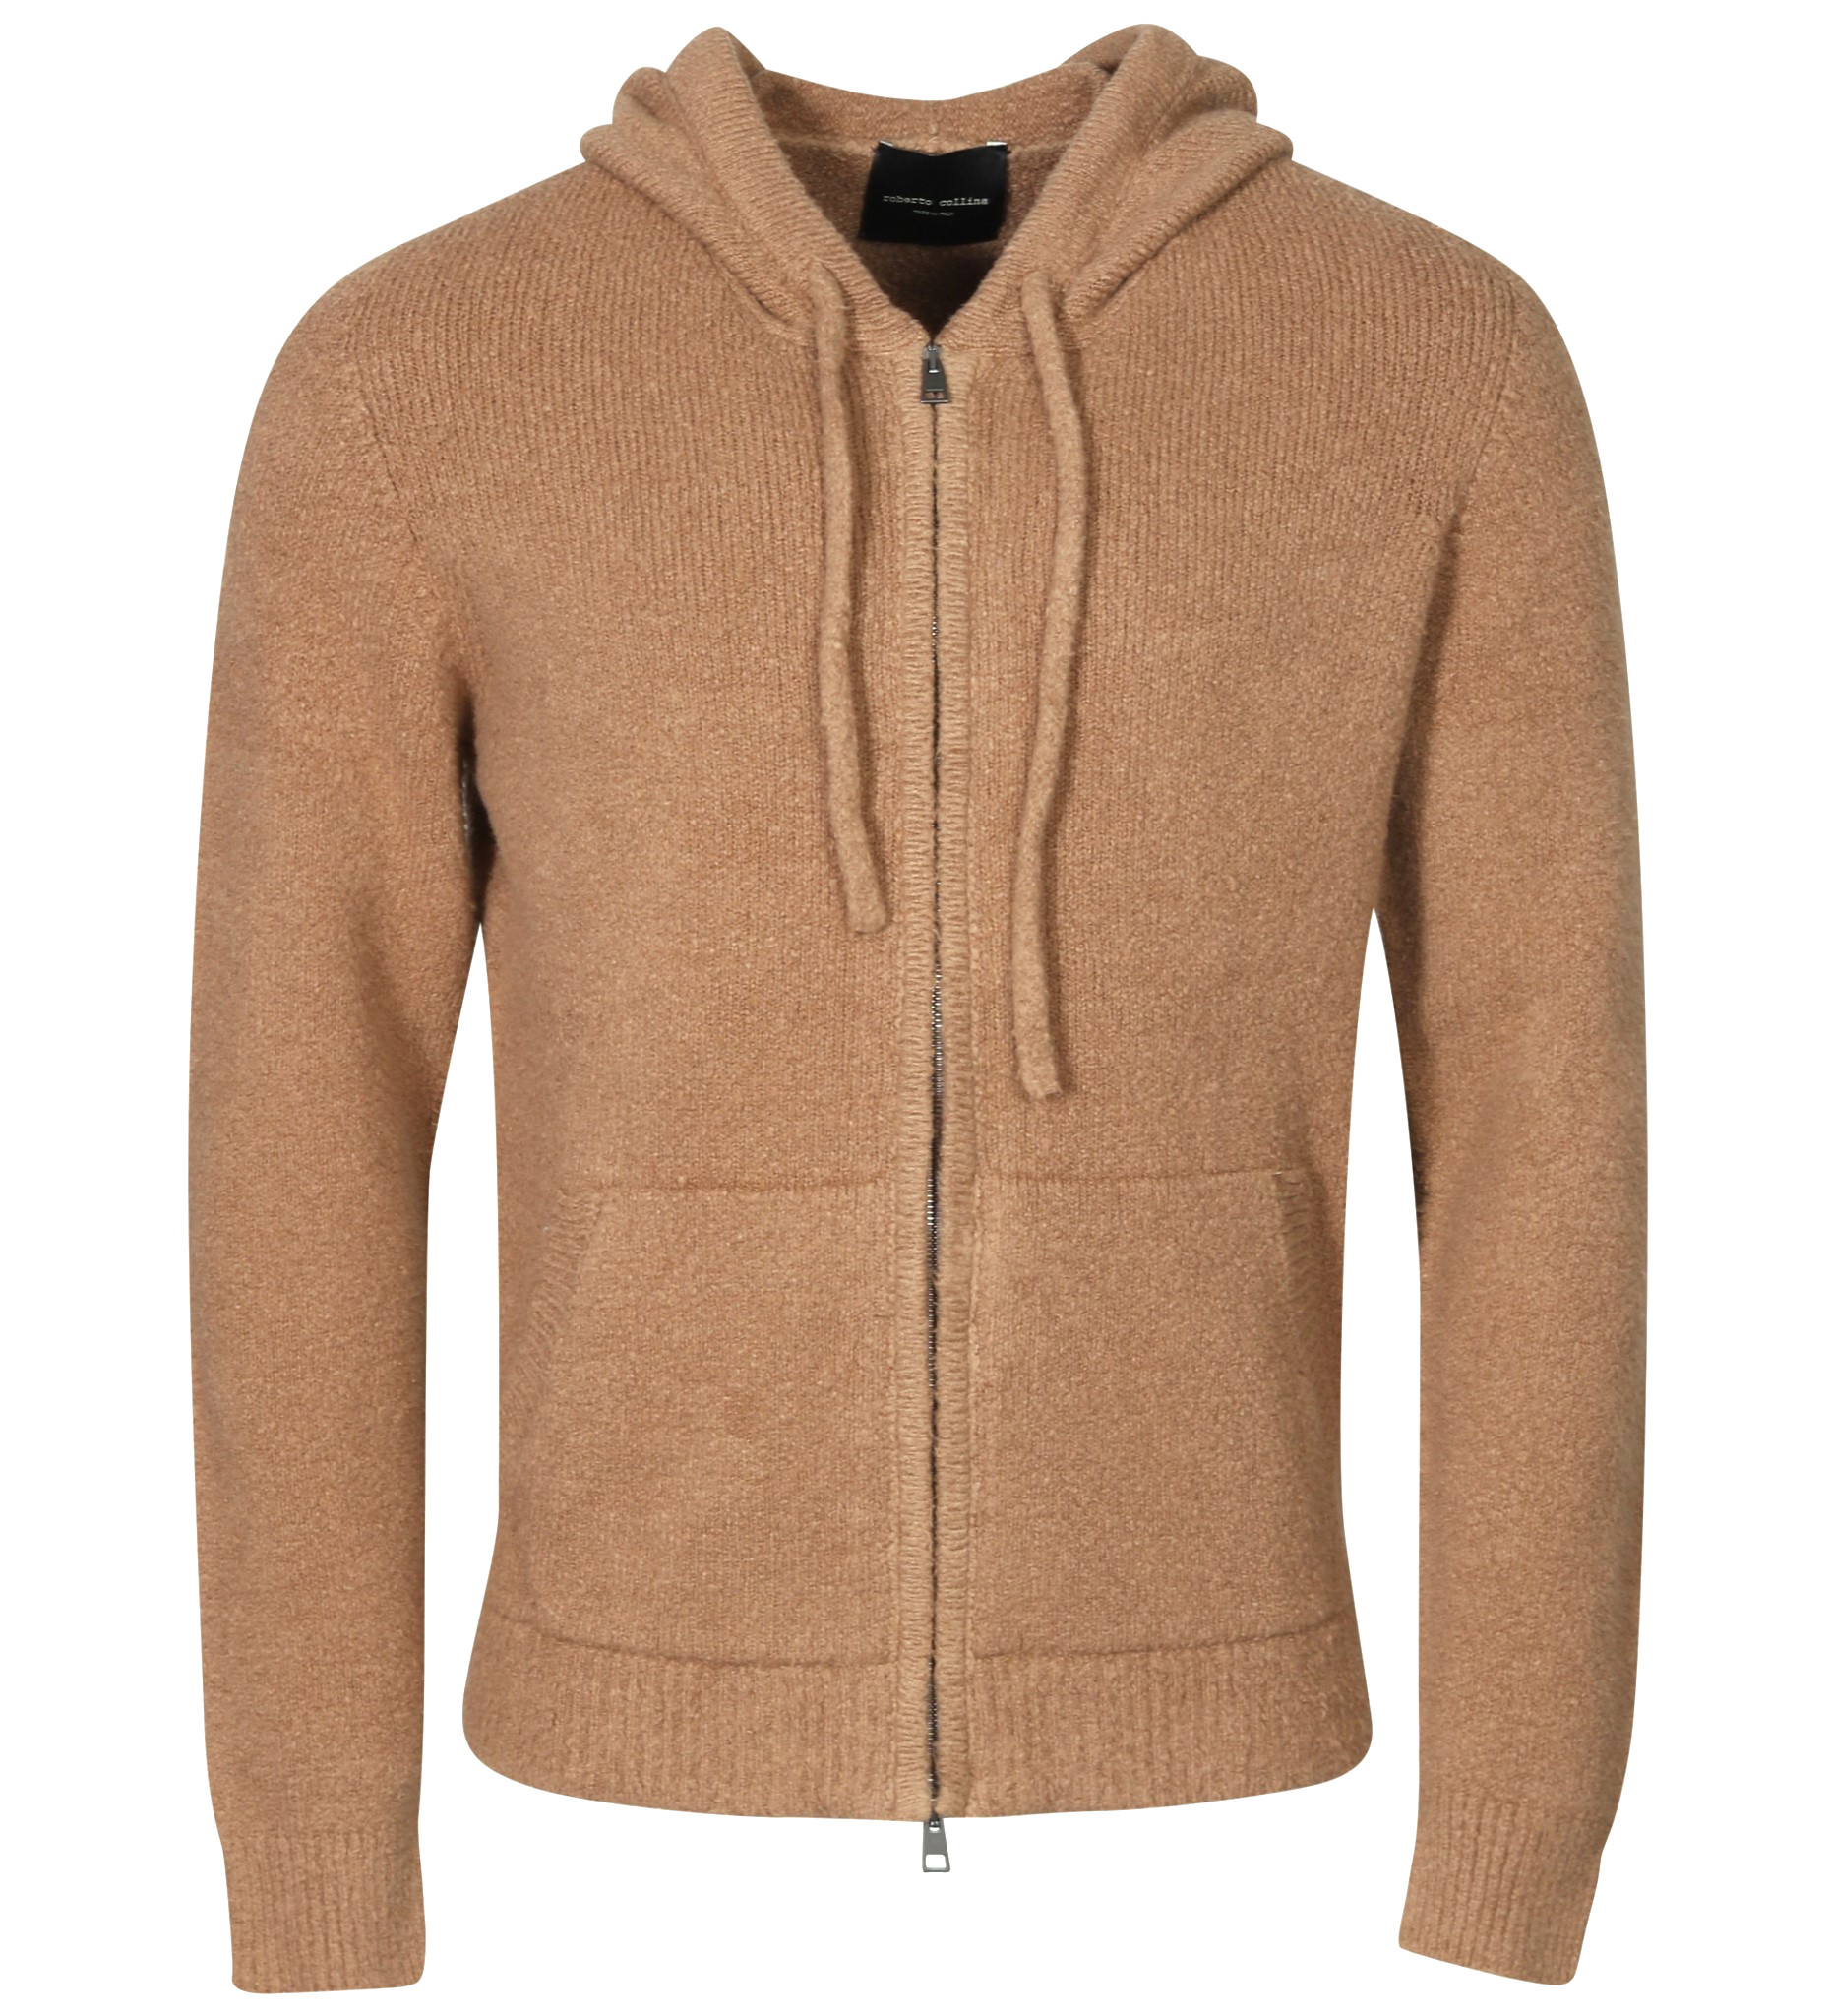 ROBERTO COLLINA Fluffy Cotton Knit Zip Hoodie in Washed Camel 56